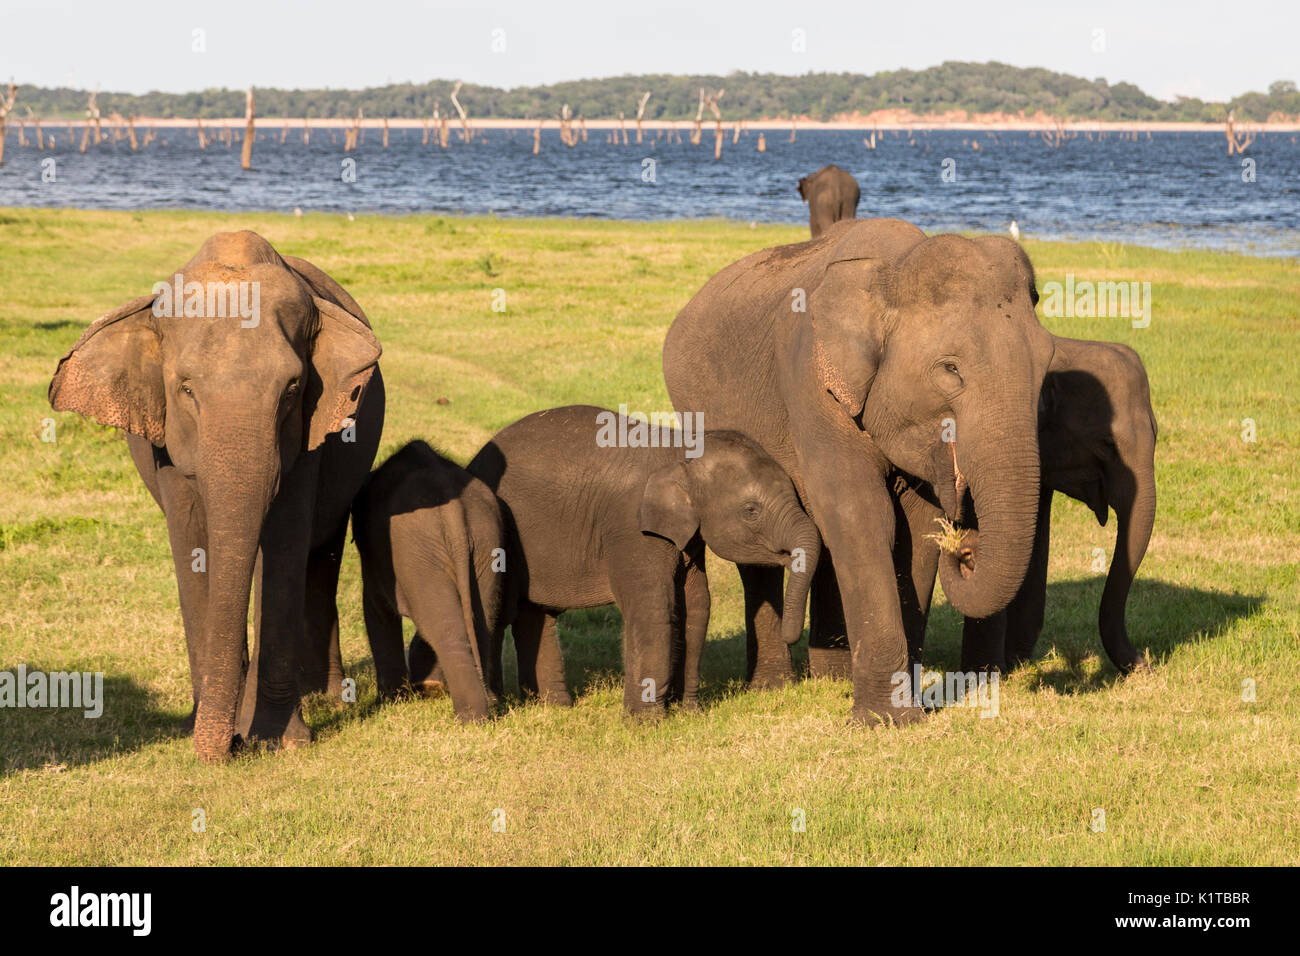 Asian elephants enjoy the open spaces of the Kaudulla National Park in the late afternoon light. Stock Photo